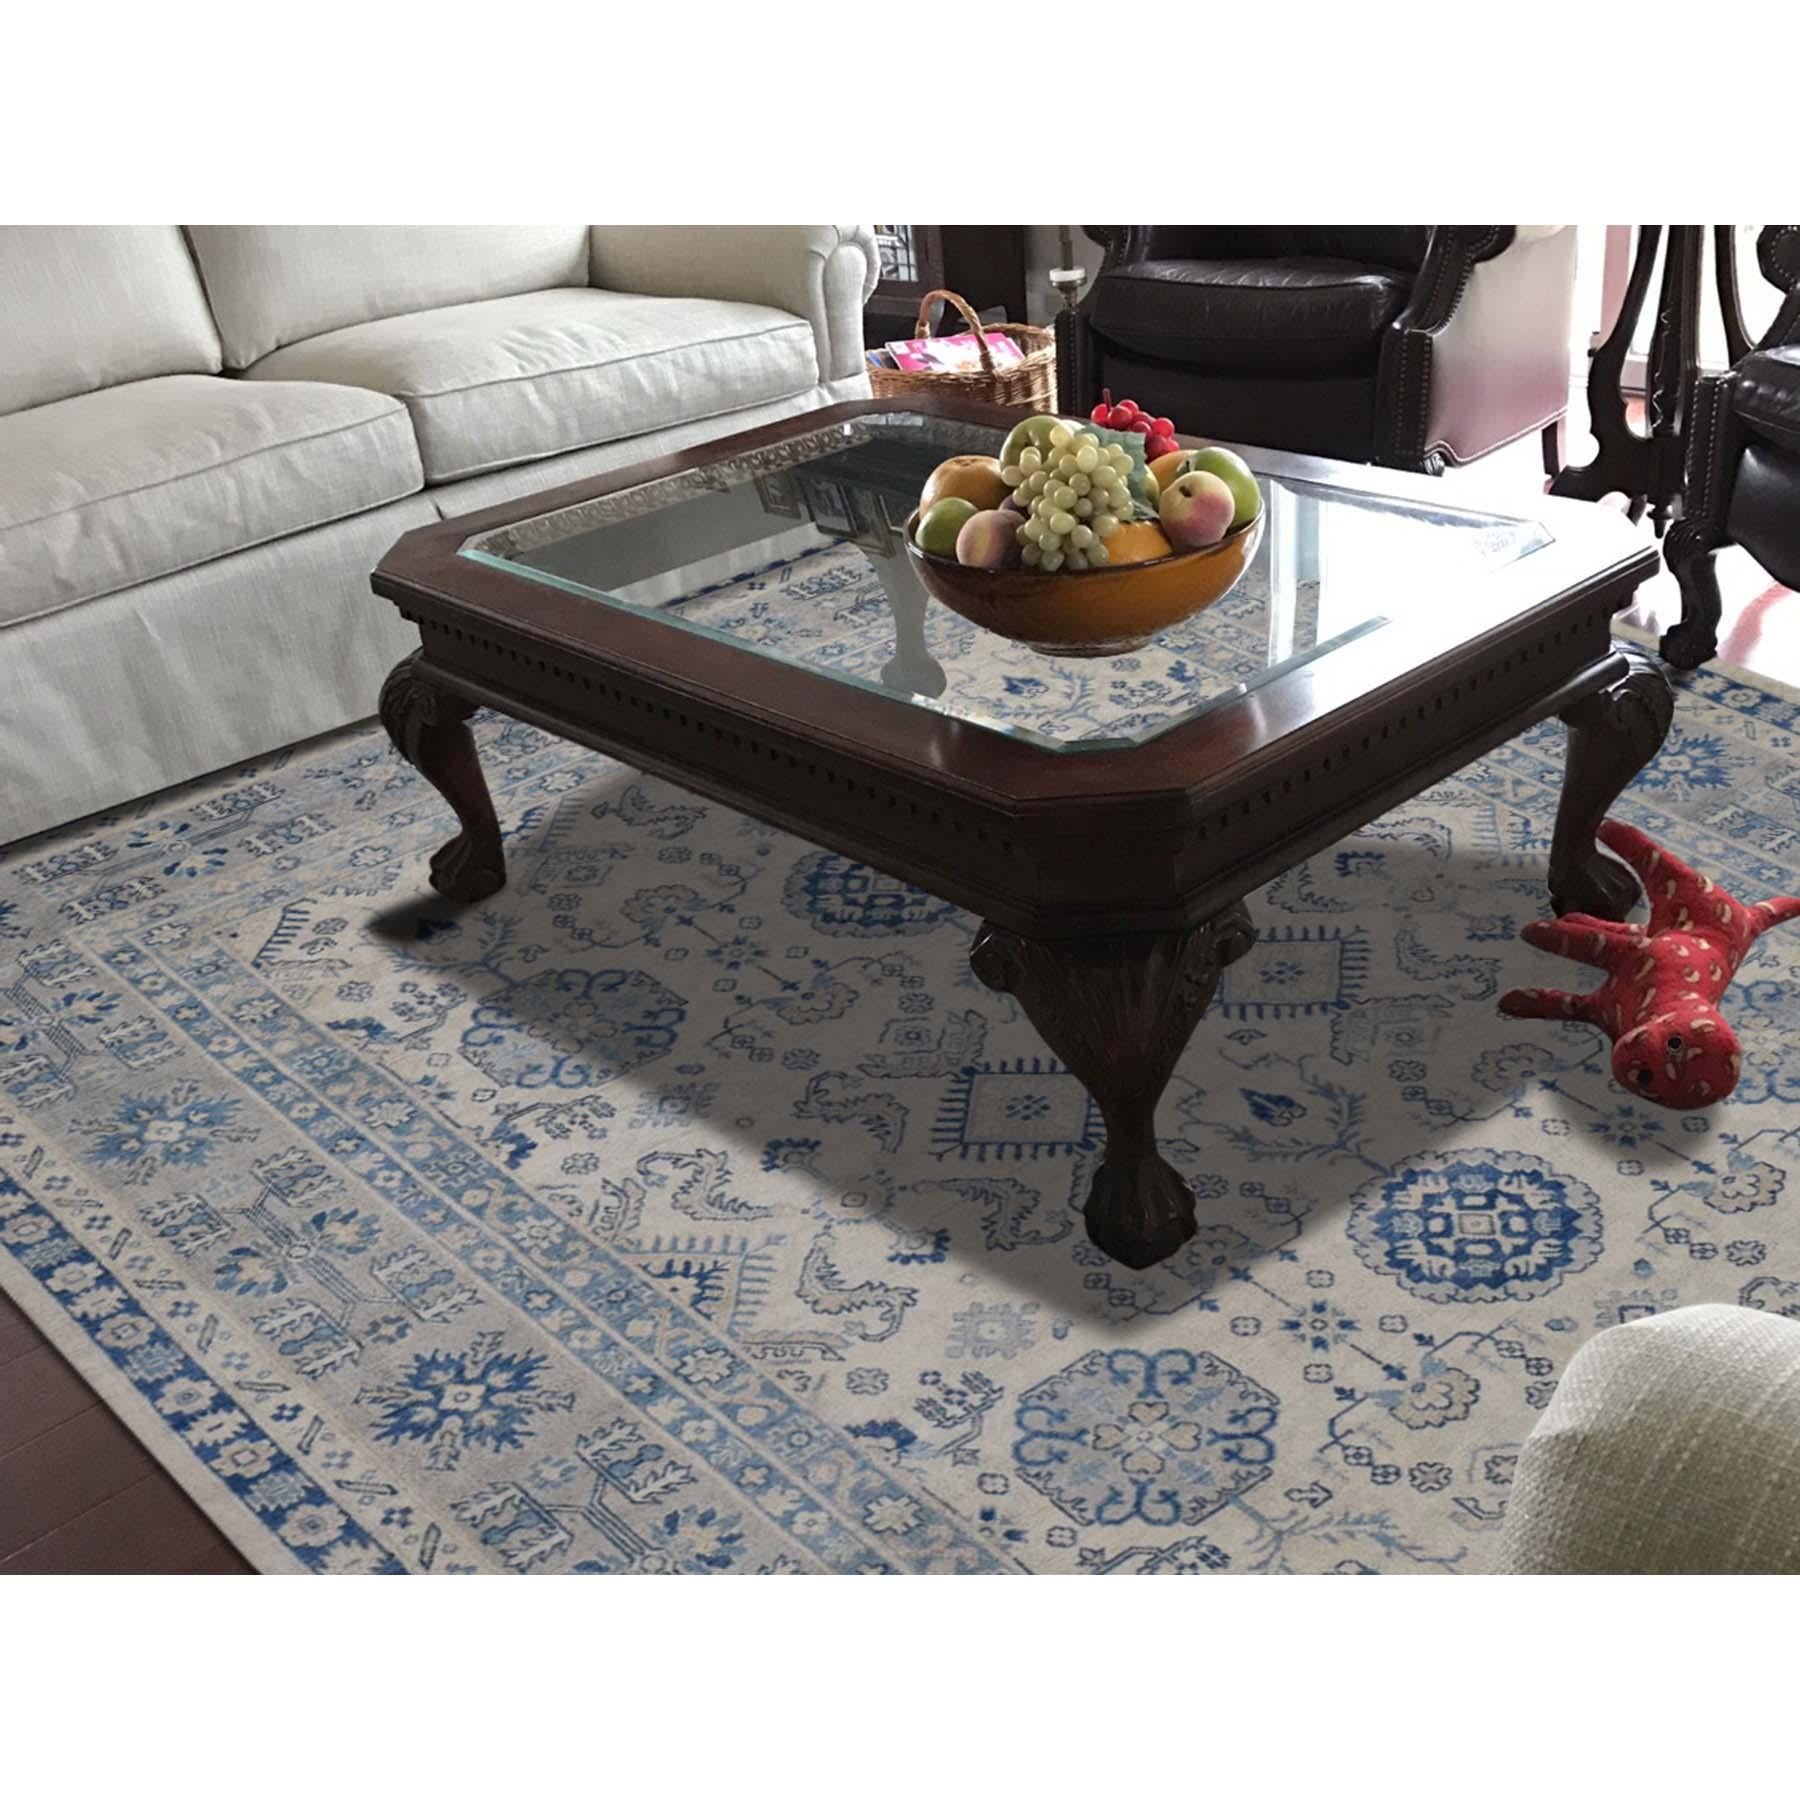 This is a truly genuine one-of-a-kind vintage look Kazak pure wool hand knotted Oriental rug. It has been knotted for months and months in the centuries-old Persian weaving craftsmanship techniques by expert artisans. Measures: 7'9